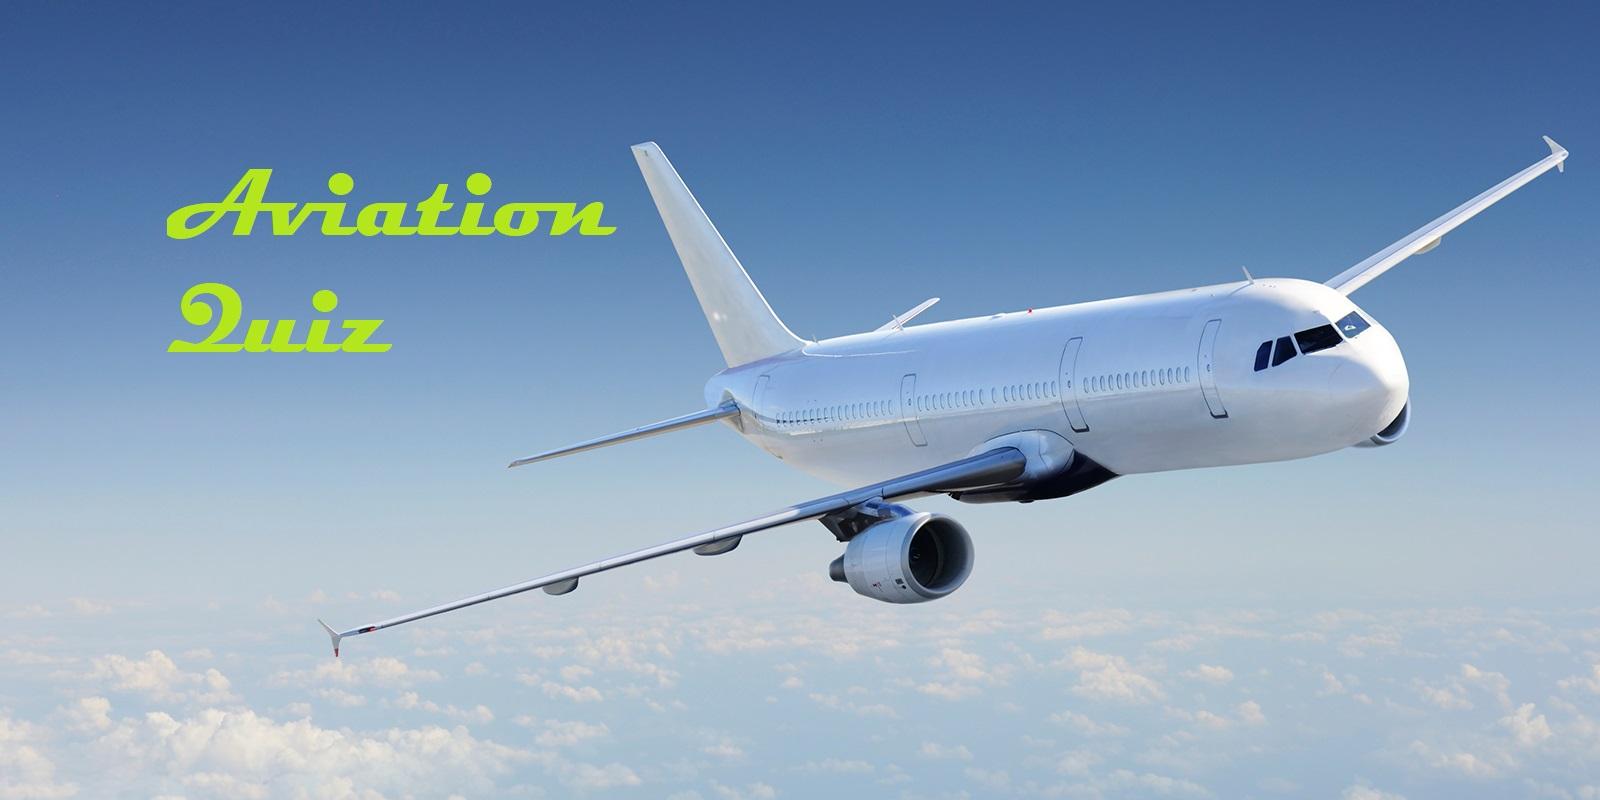 YS Aviation Quiz - Win a ticket for YS Aviation Workshop, worth INR 1000! - With Young-Scientist.in